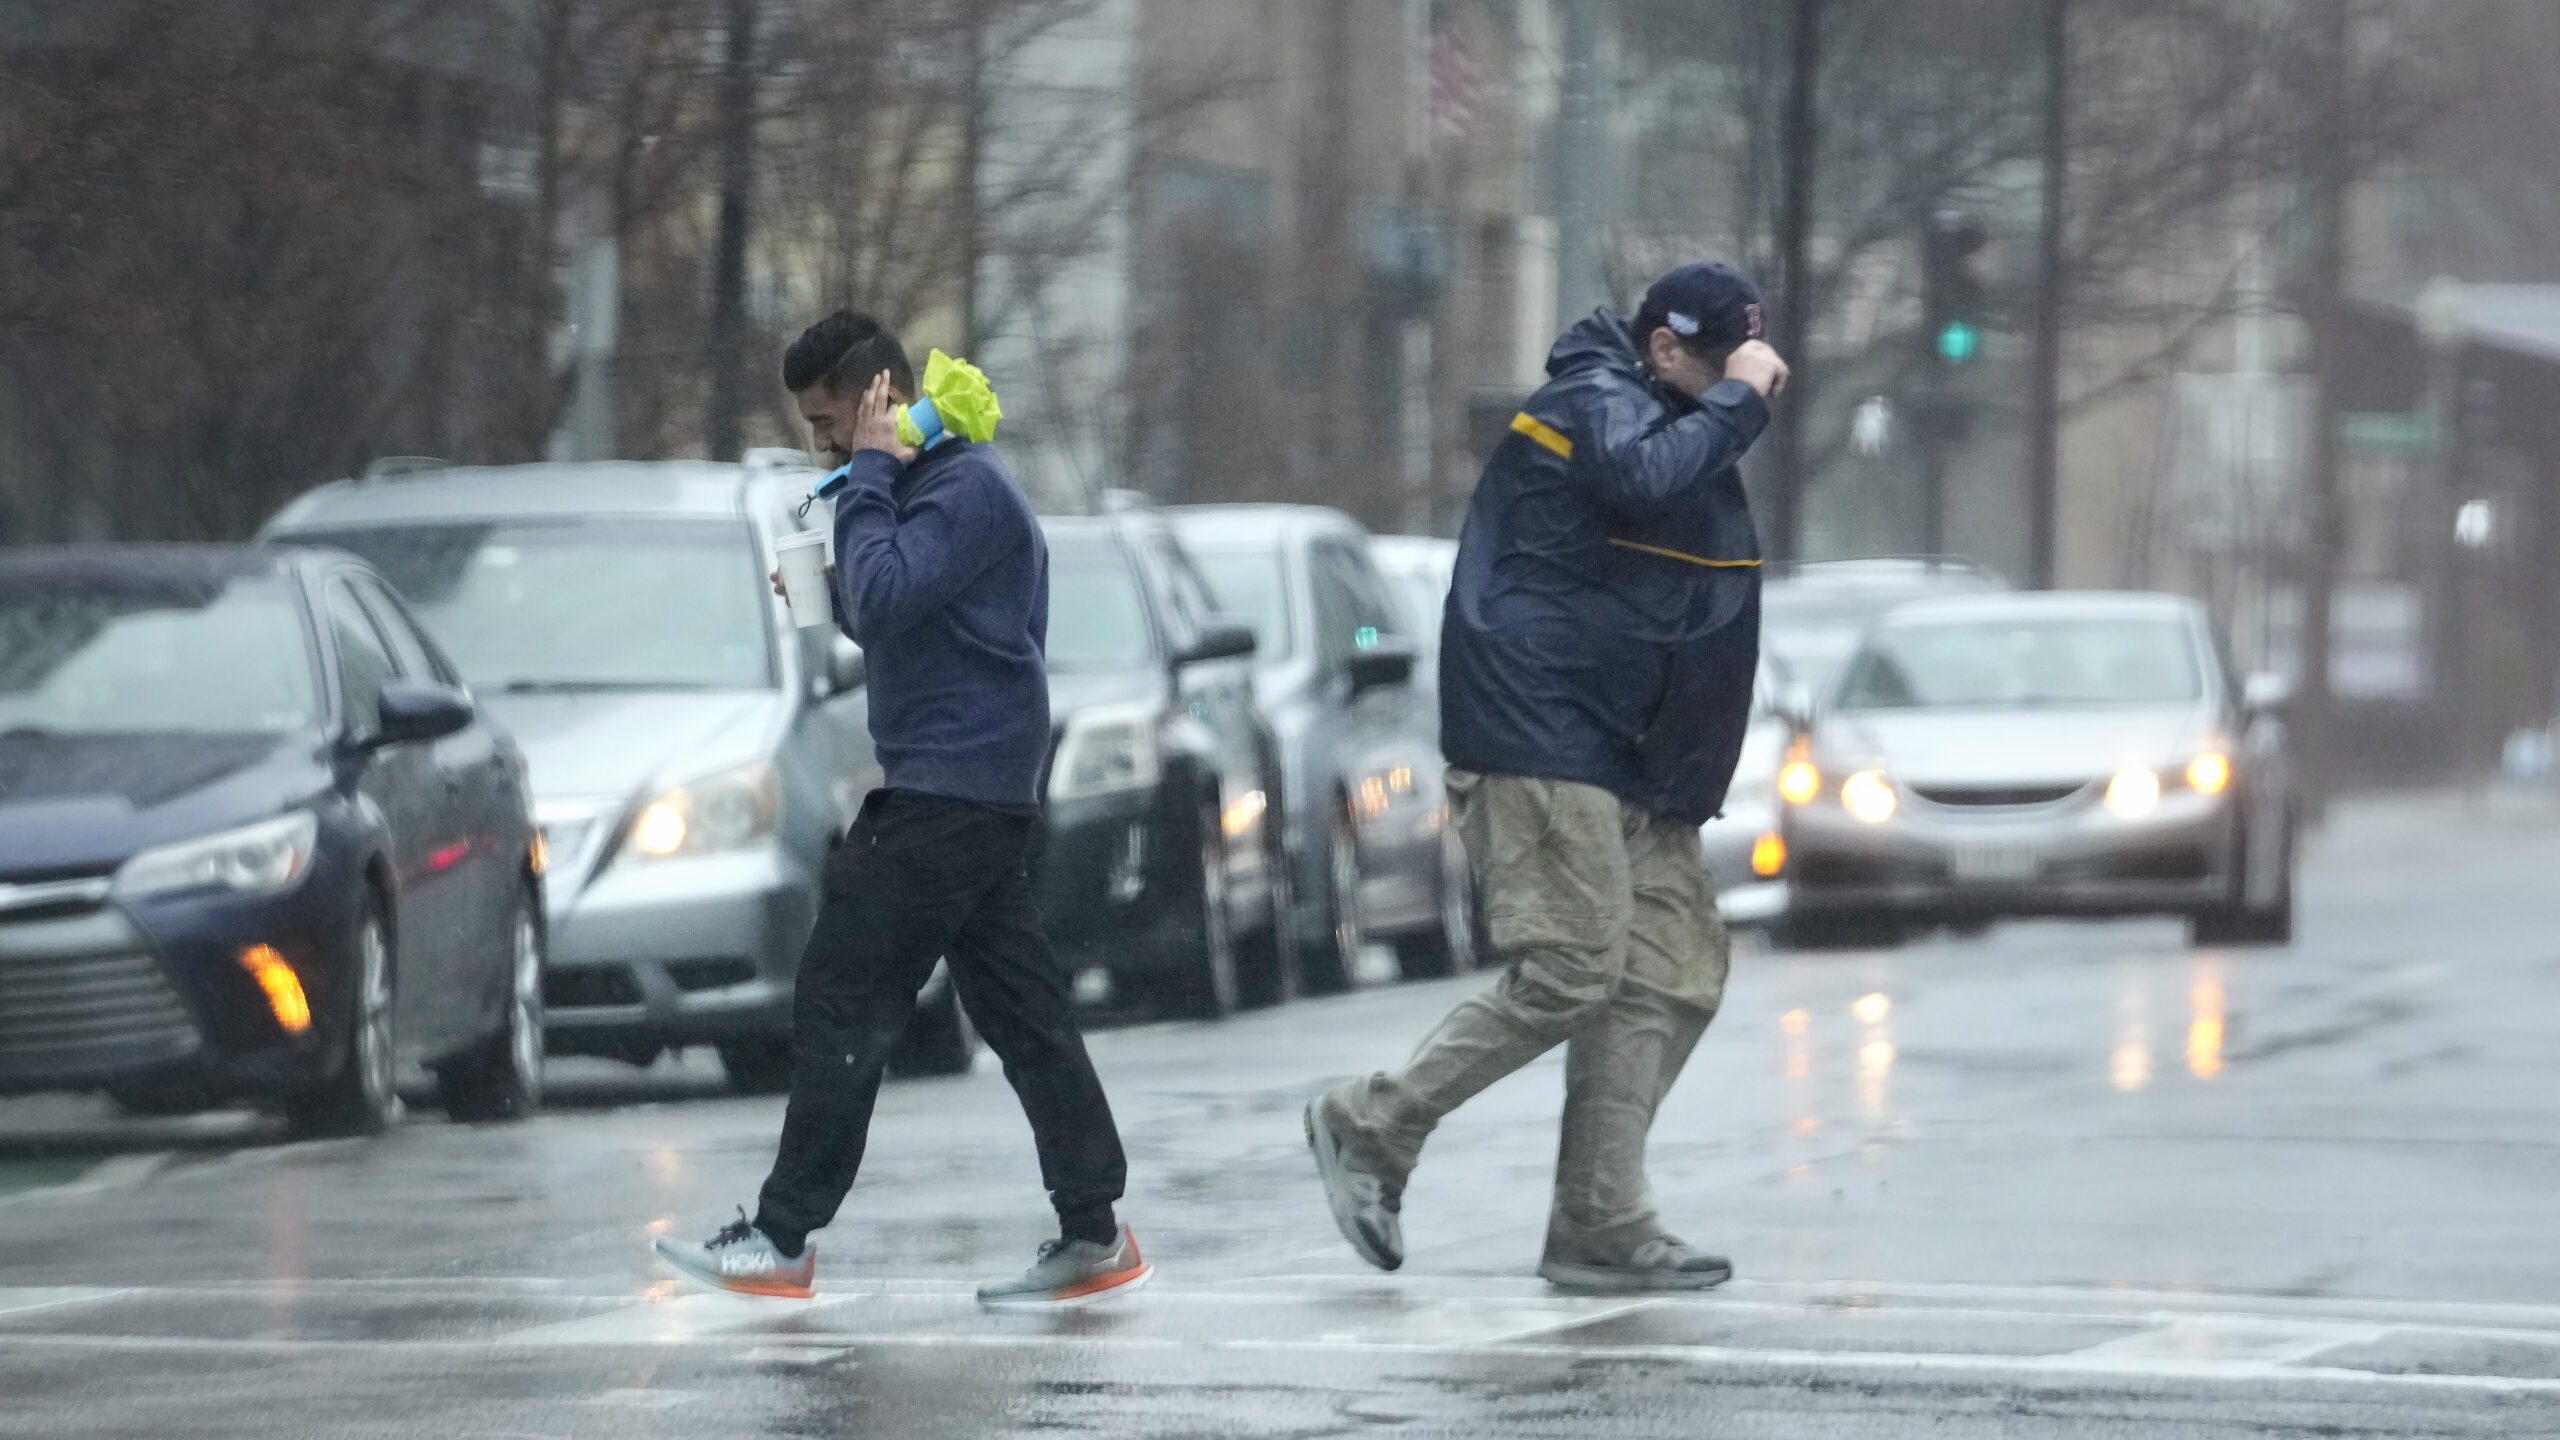 Deadly storm batters the Northeast, knocking out power and grounding flights